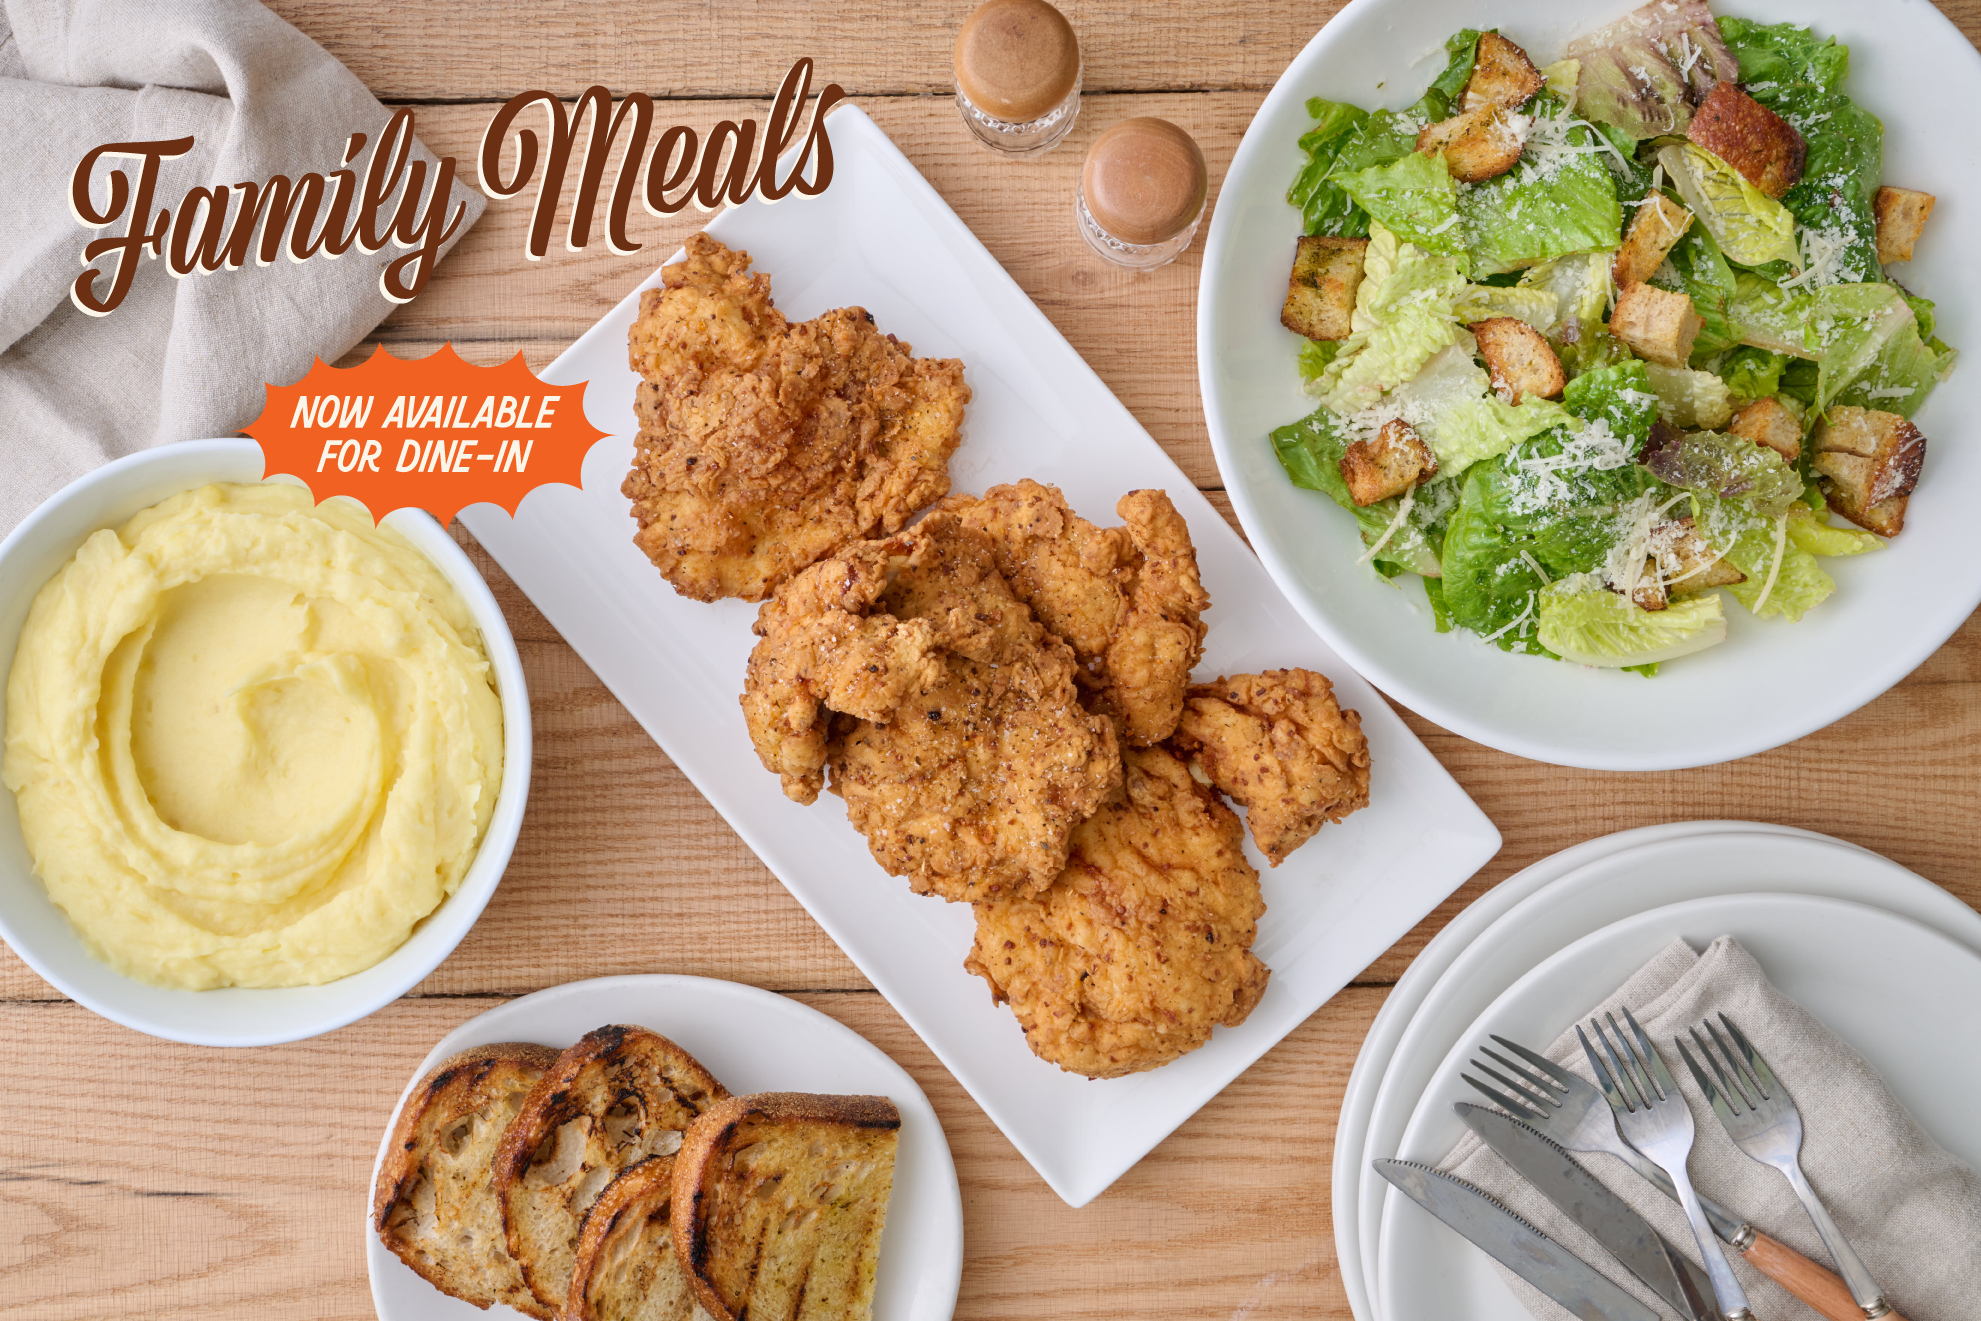 Tender Greens Fried Chicken Family Meal